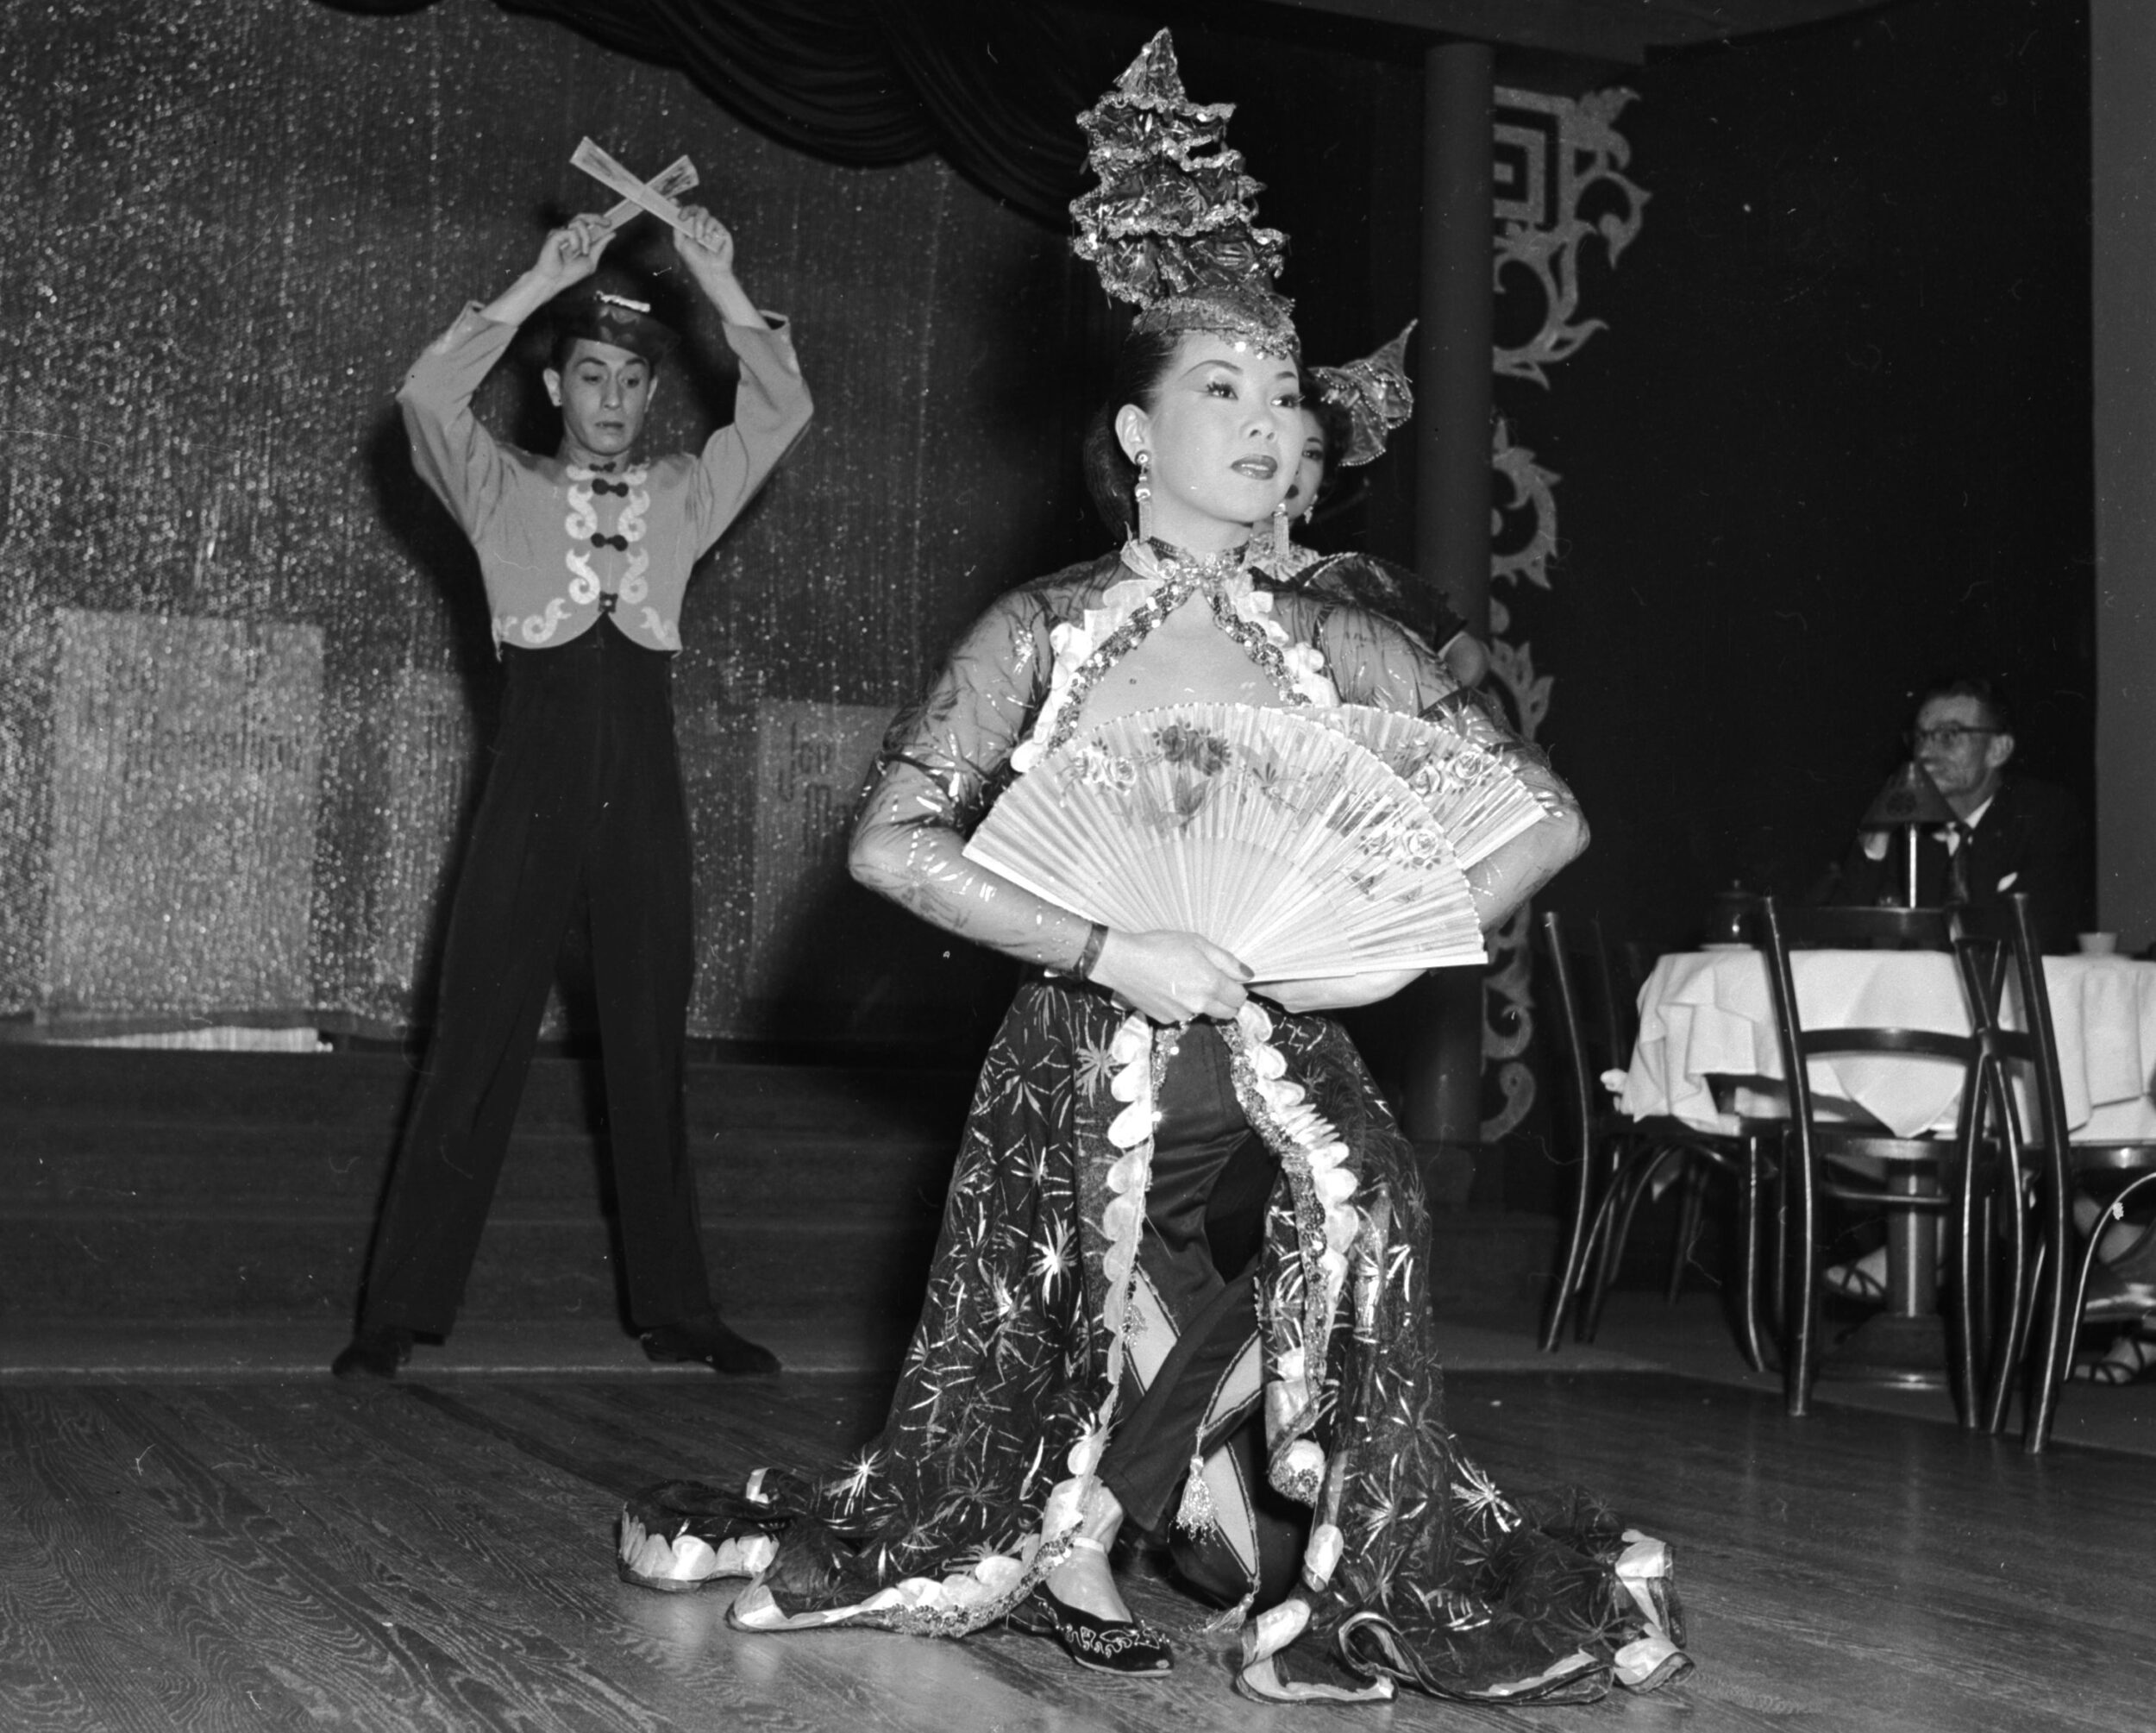 Chinese dancers perform on stage with elaborate costumes and a large decorate fan in a black-and-white photo.